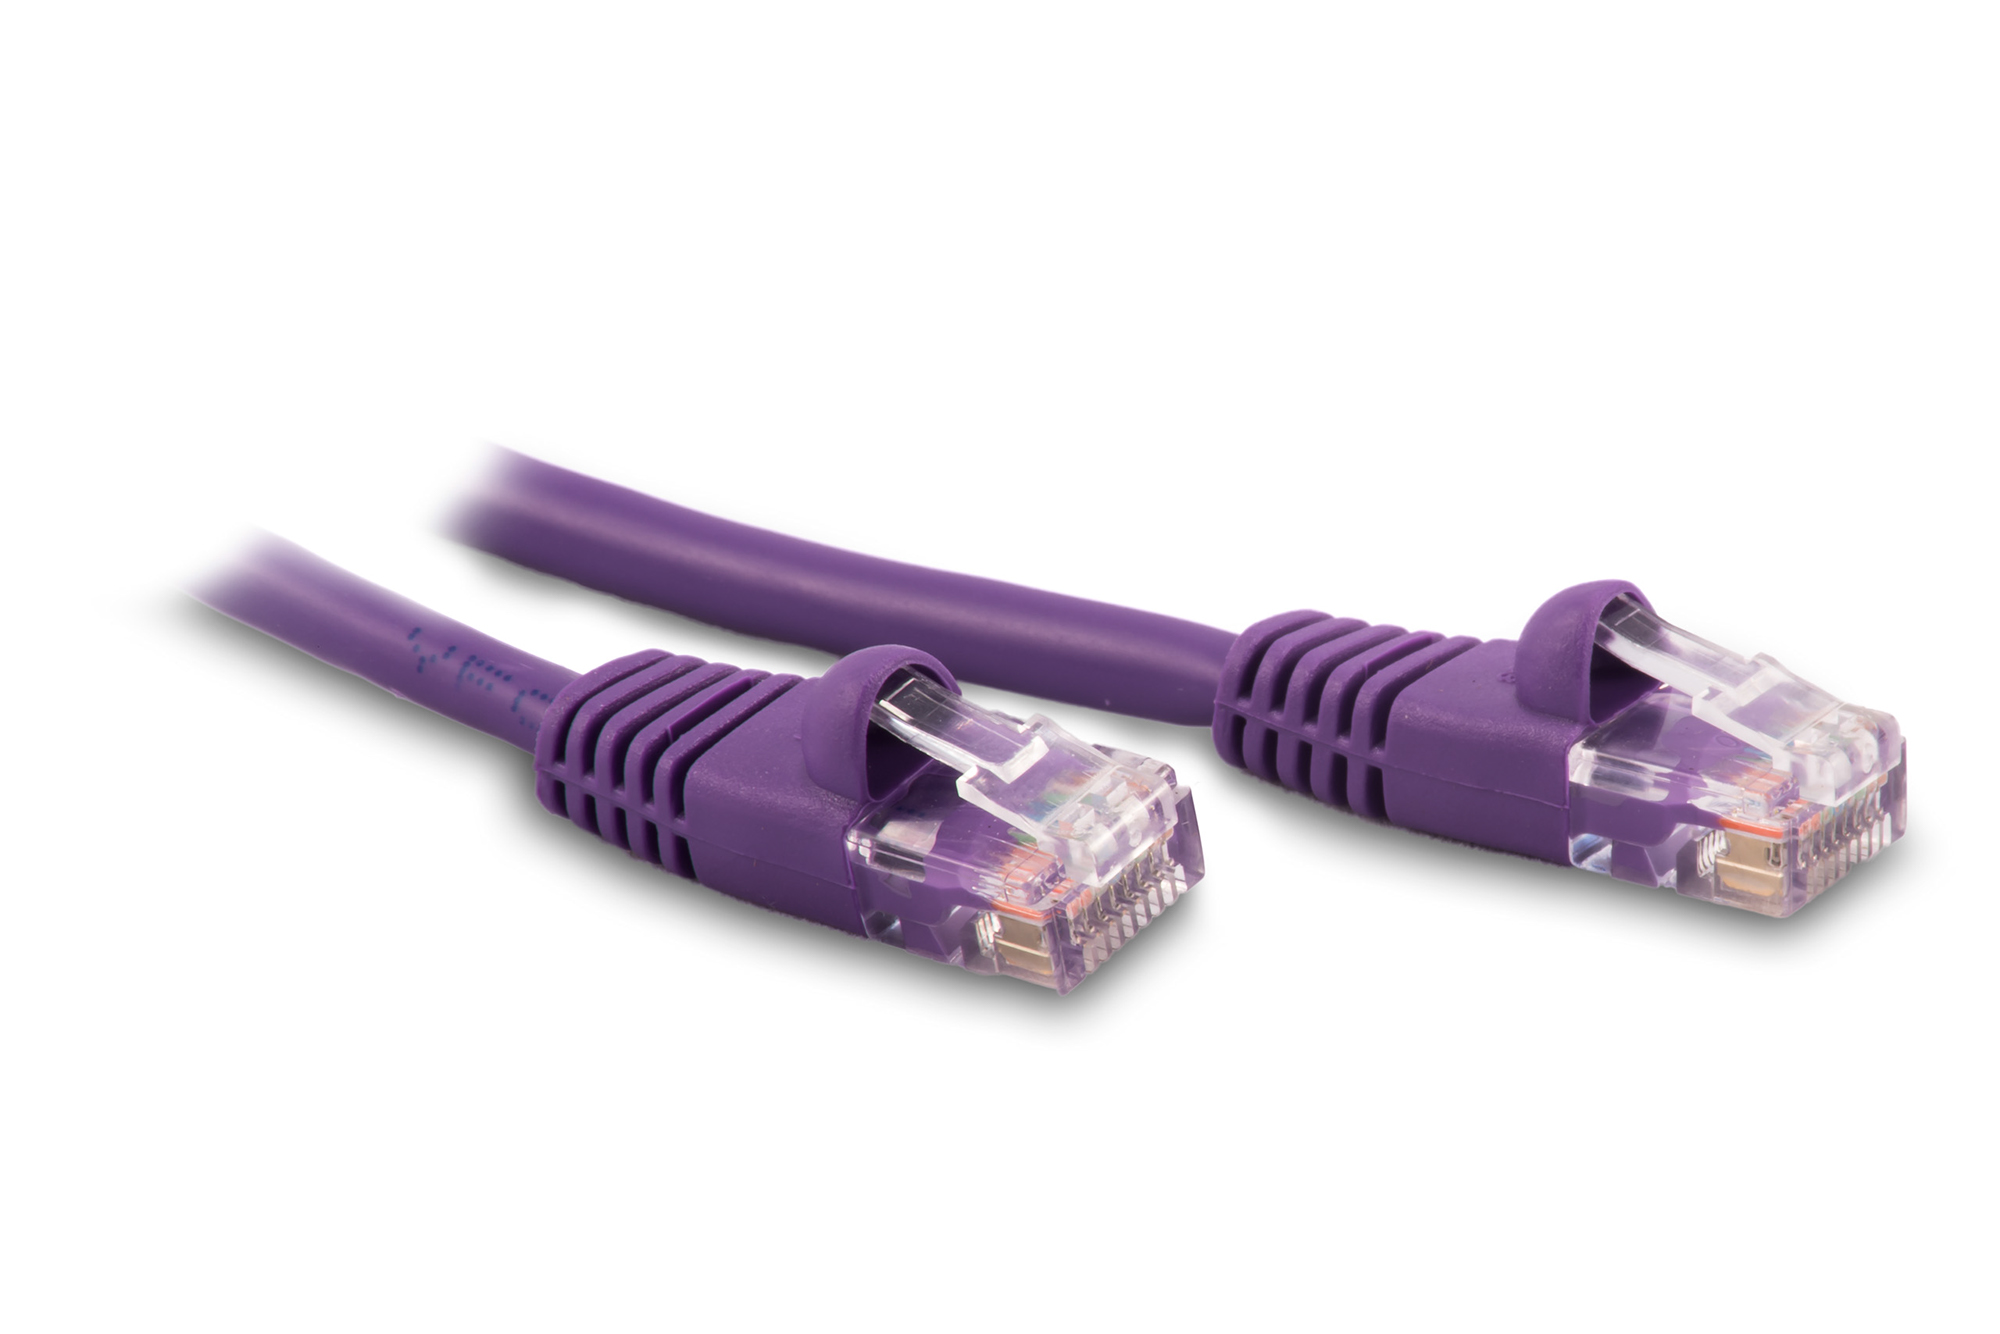 40ft Cat5e Ethernet Patch Cable - Violet Color - Snagless Boot